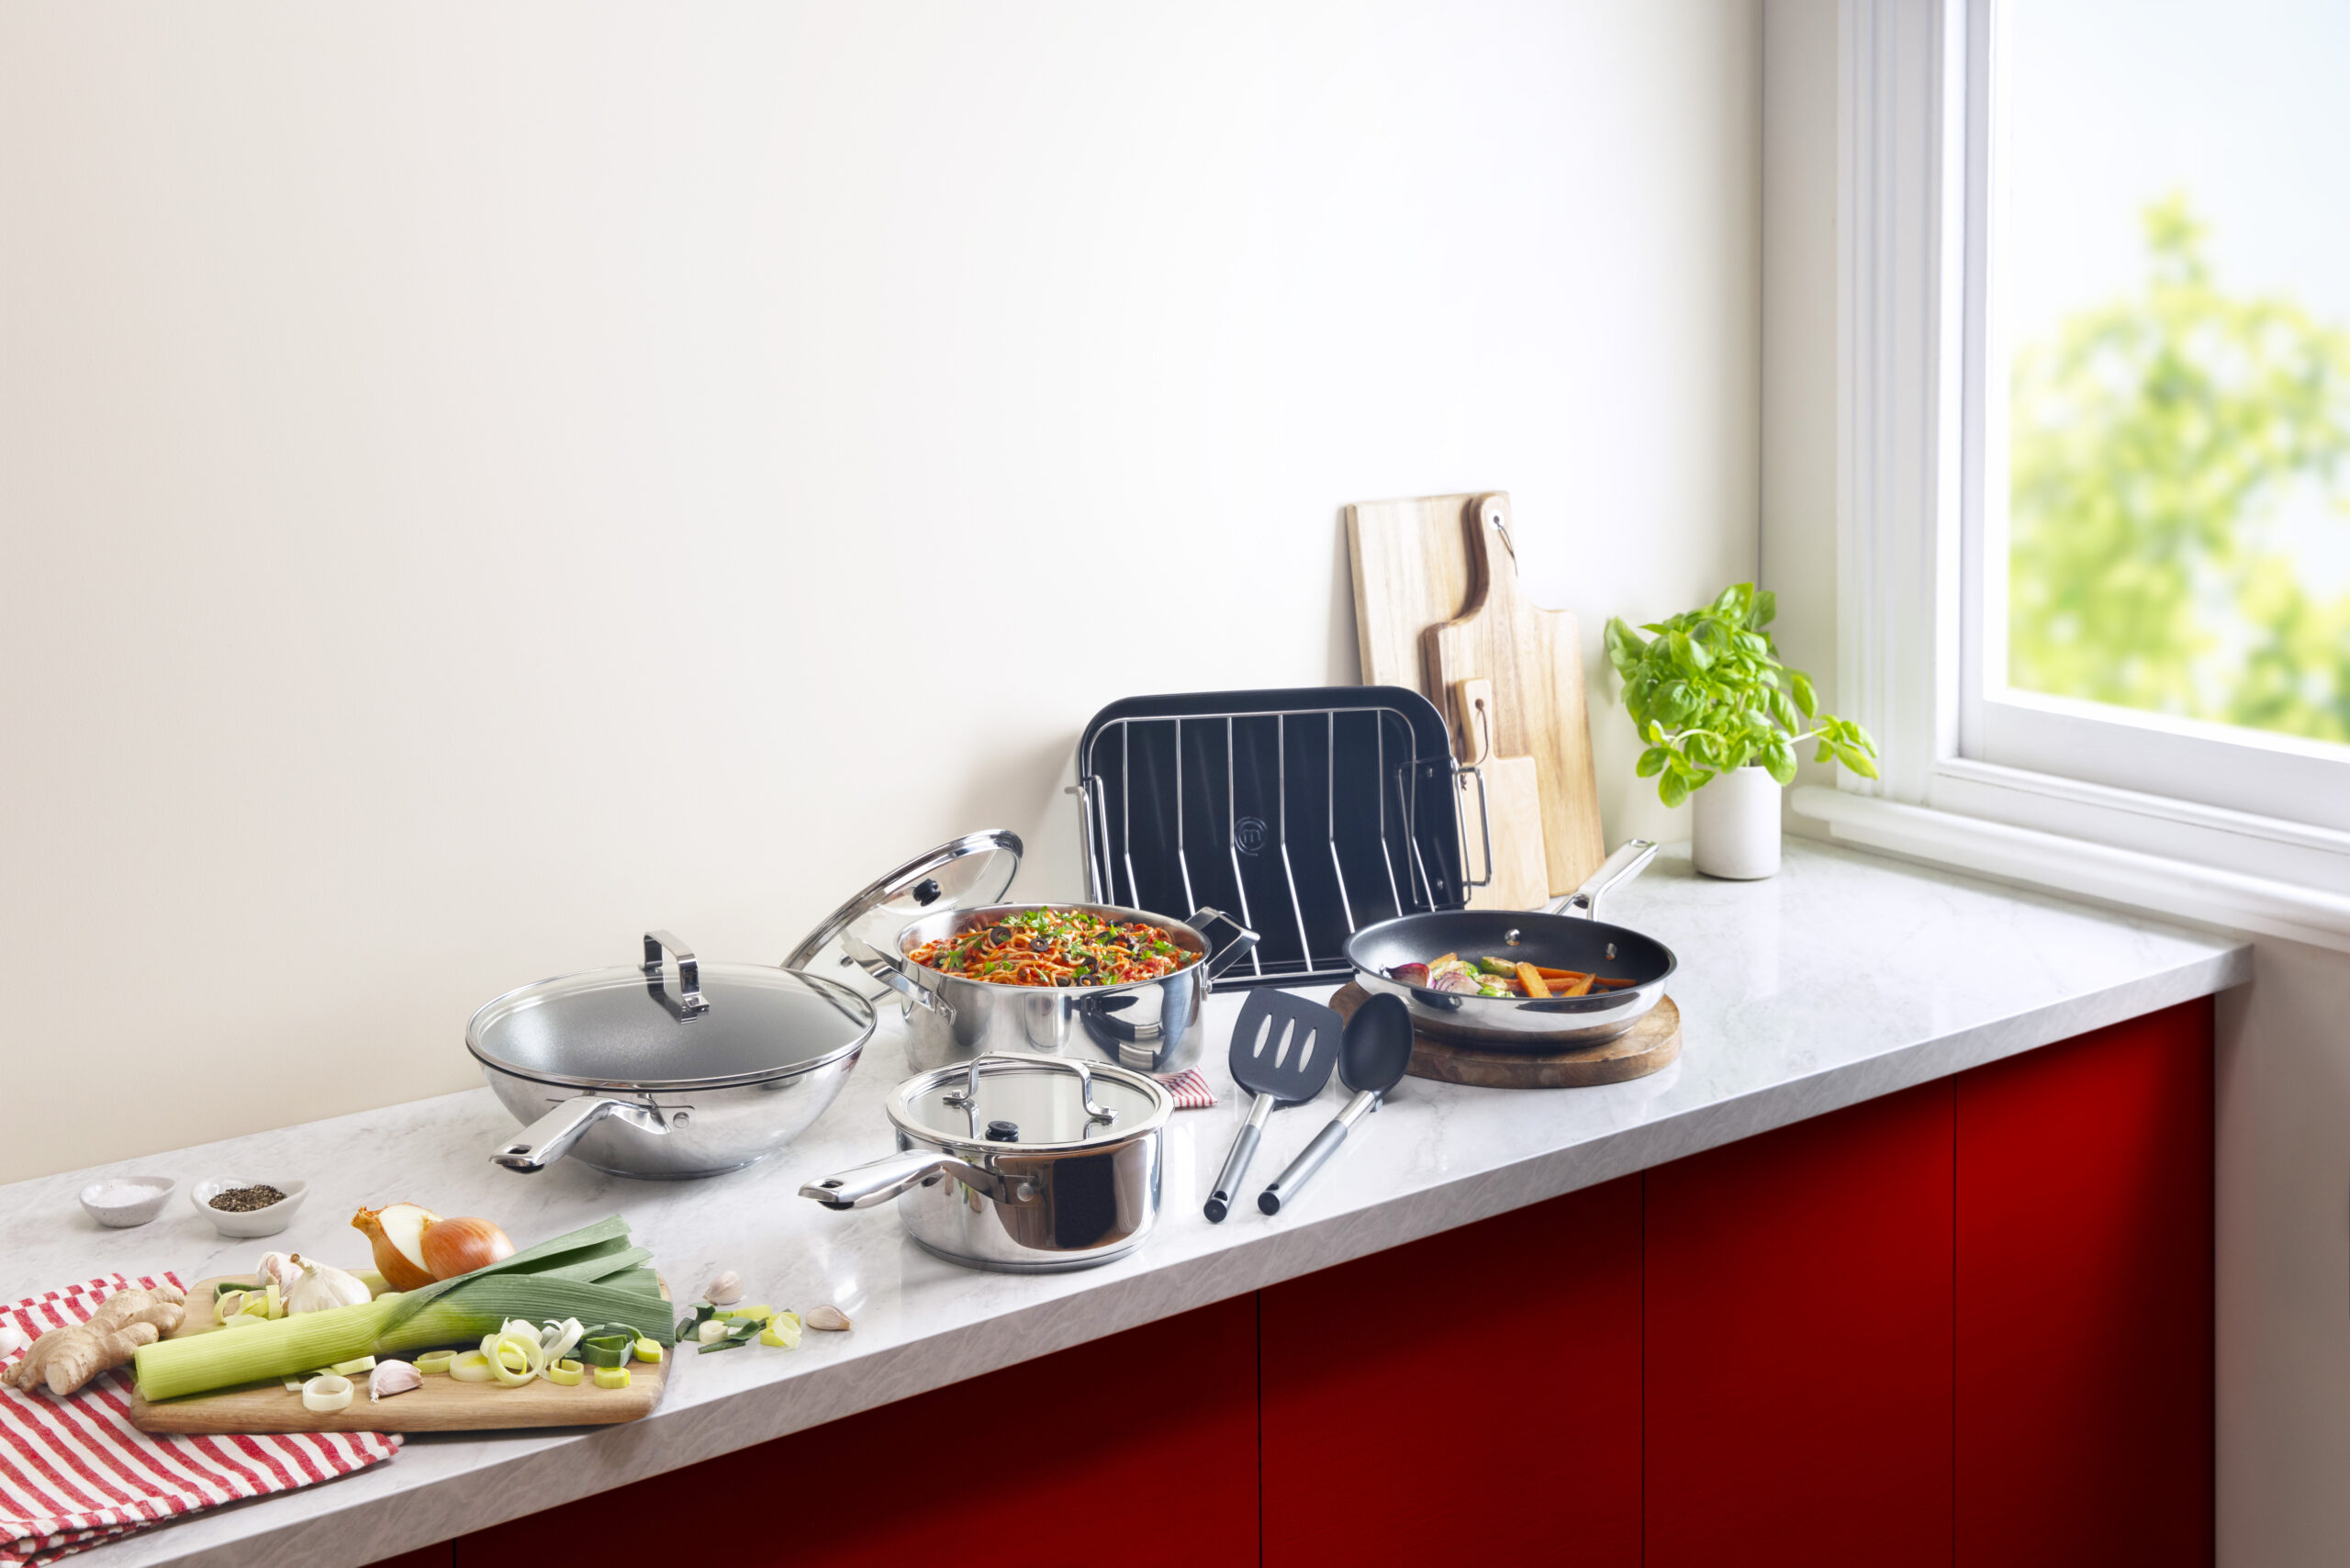 Win a New World cookware set valued at $725!